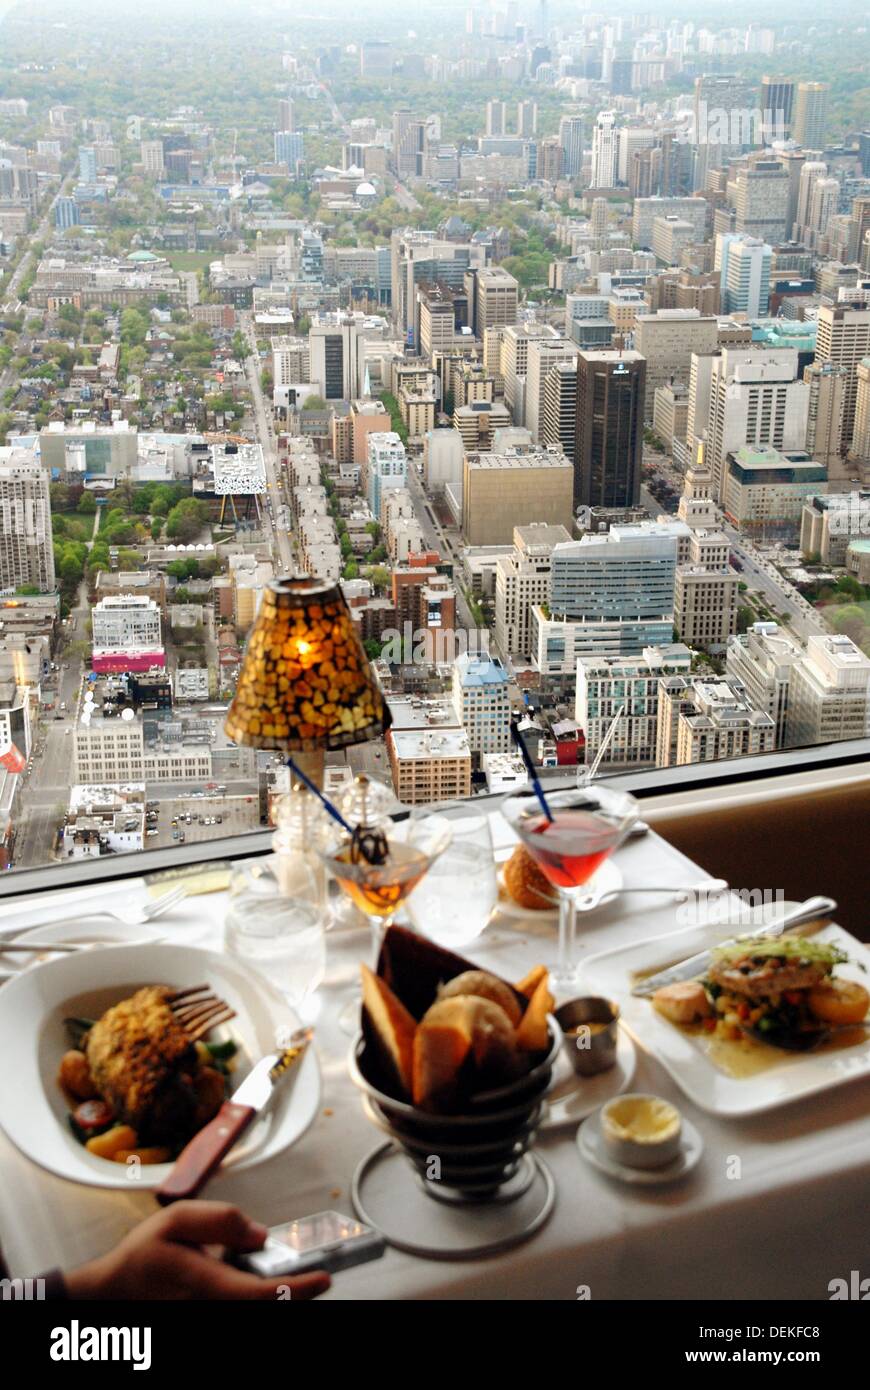 356 The Top Of The Tower Restaurant Stock Photos, High-Res